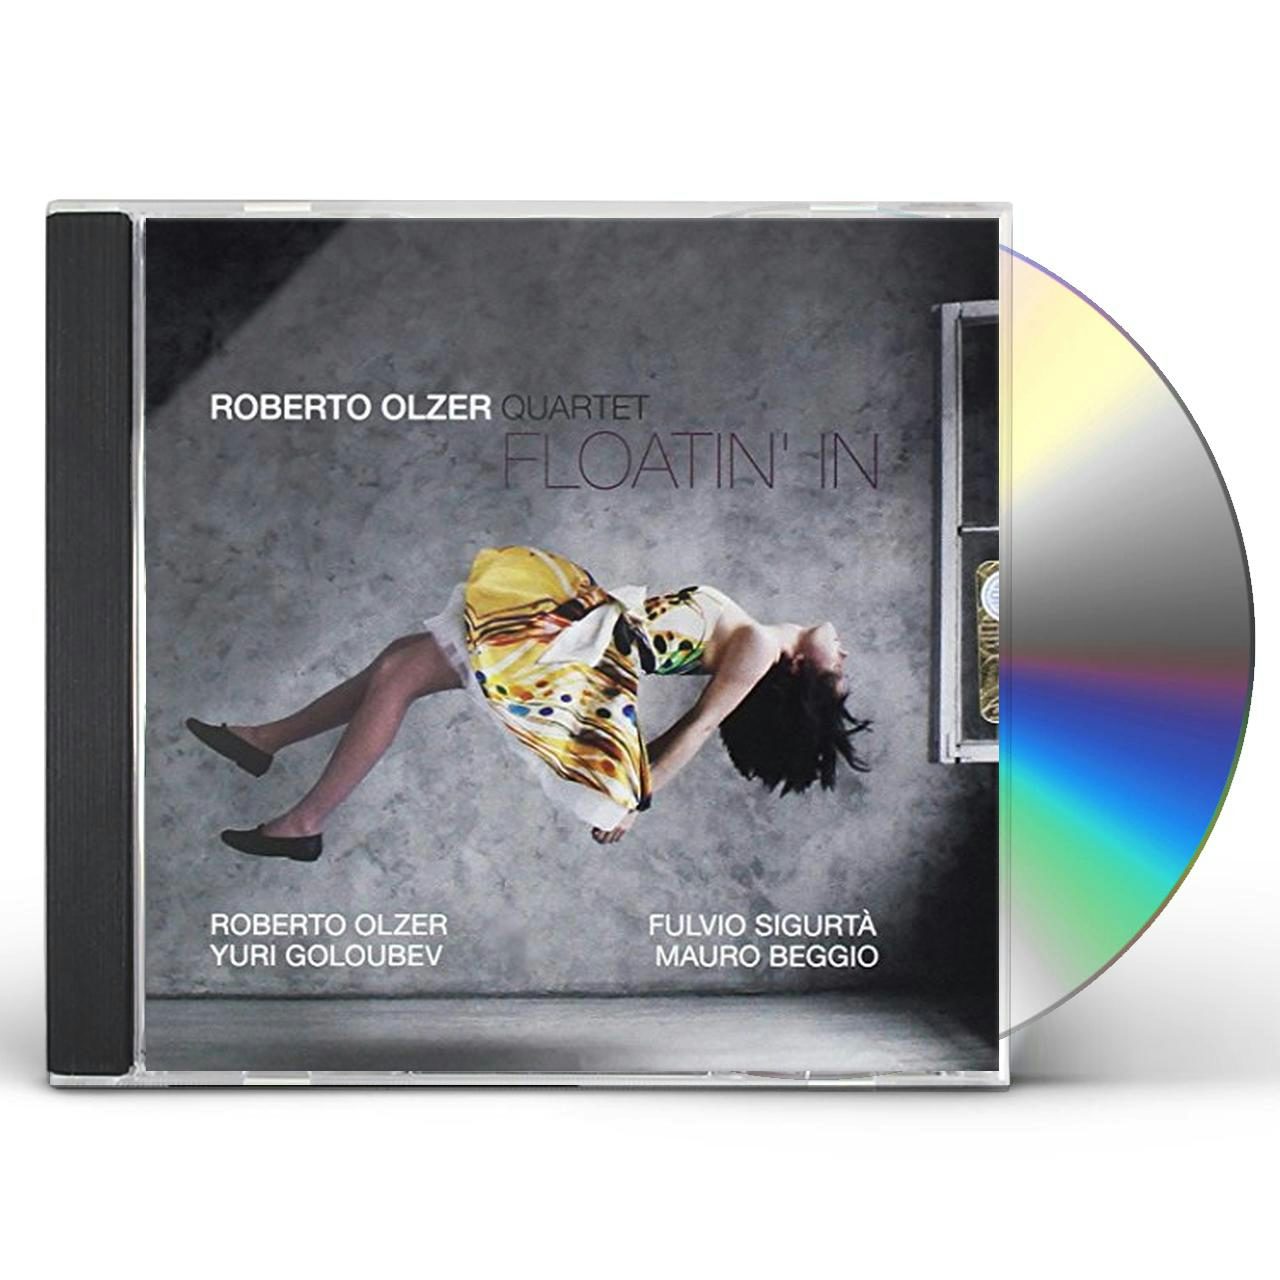 STEPPIN OUT Vinyl Record - Roberto Olzer